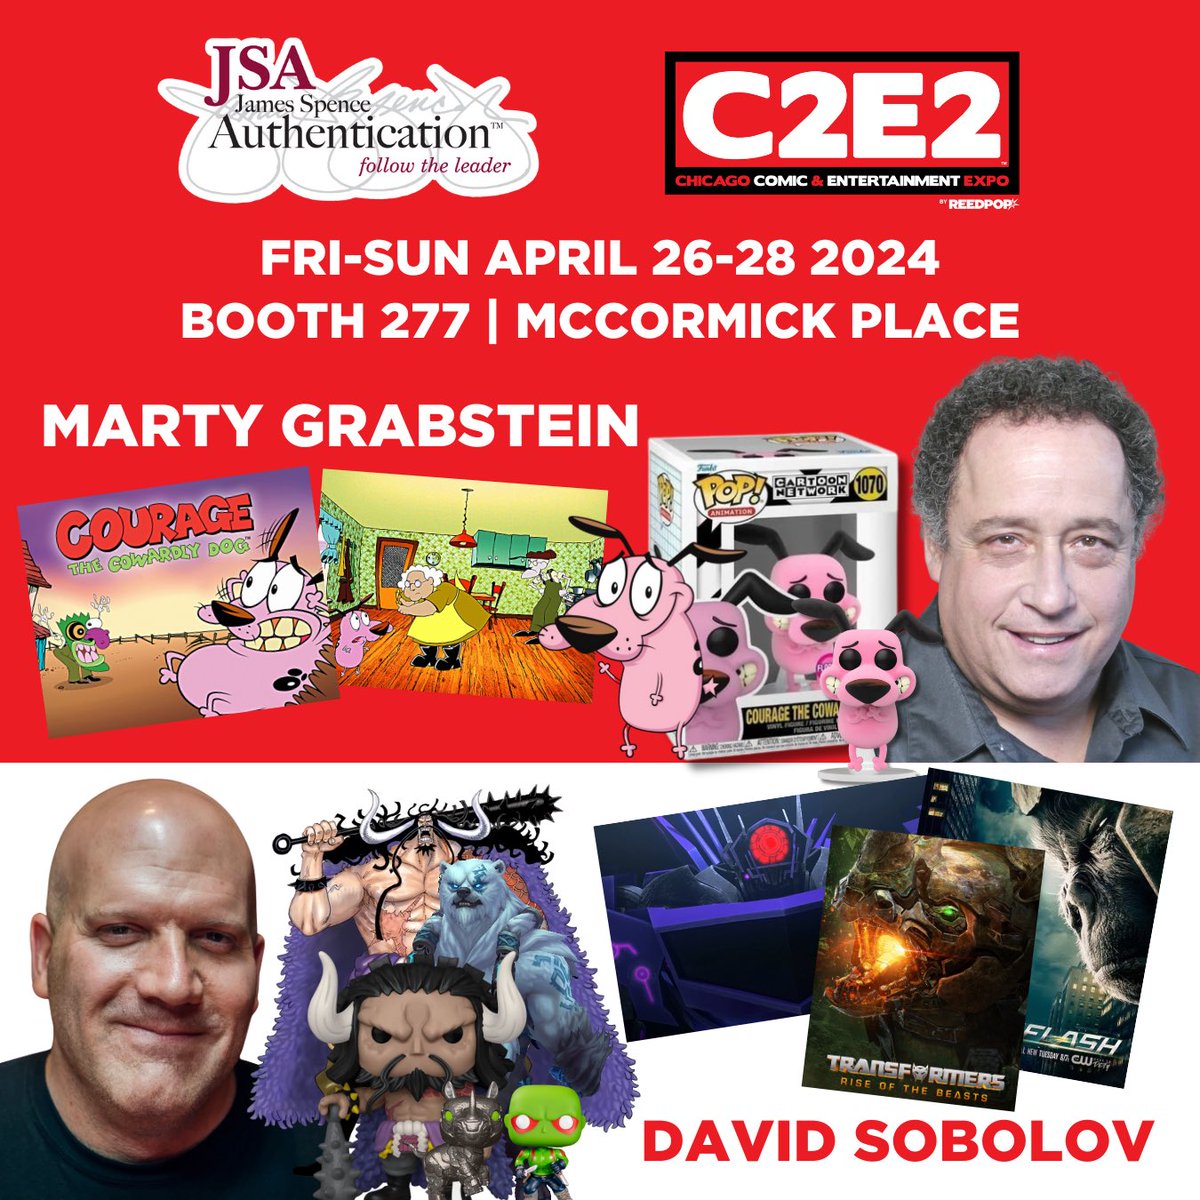 JSA BOOTH 277 at C2E2 hosts Marty Grabstein and David Sobolov @volobos ALL 3 DAYS Stop by and say hi to the voice of Courage the Cowardly Dog and Kaido from One Piece. Marty and David will be signing autographs and taking selfies all weekend long at #C2E2 JSA will be available…